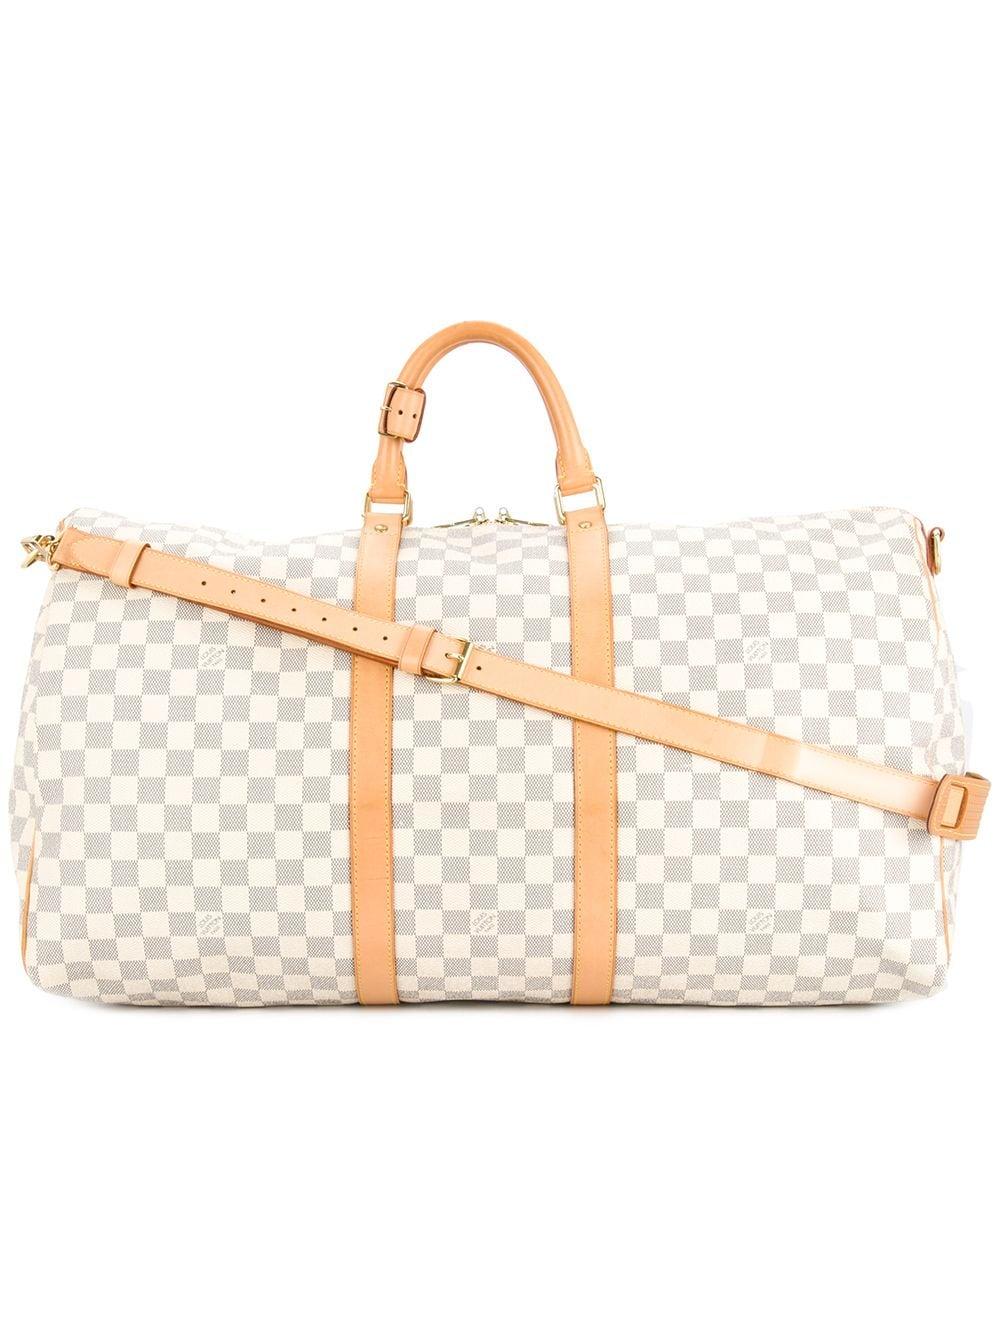 Louis Vuitton Pre-Owned Keepall Bandoulière 55 Duffle Bag in White | Lyst  Canada